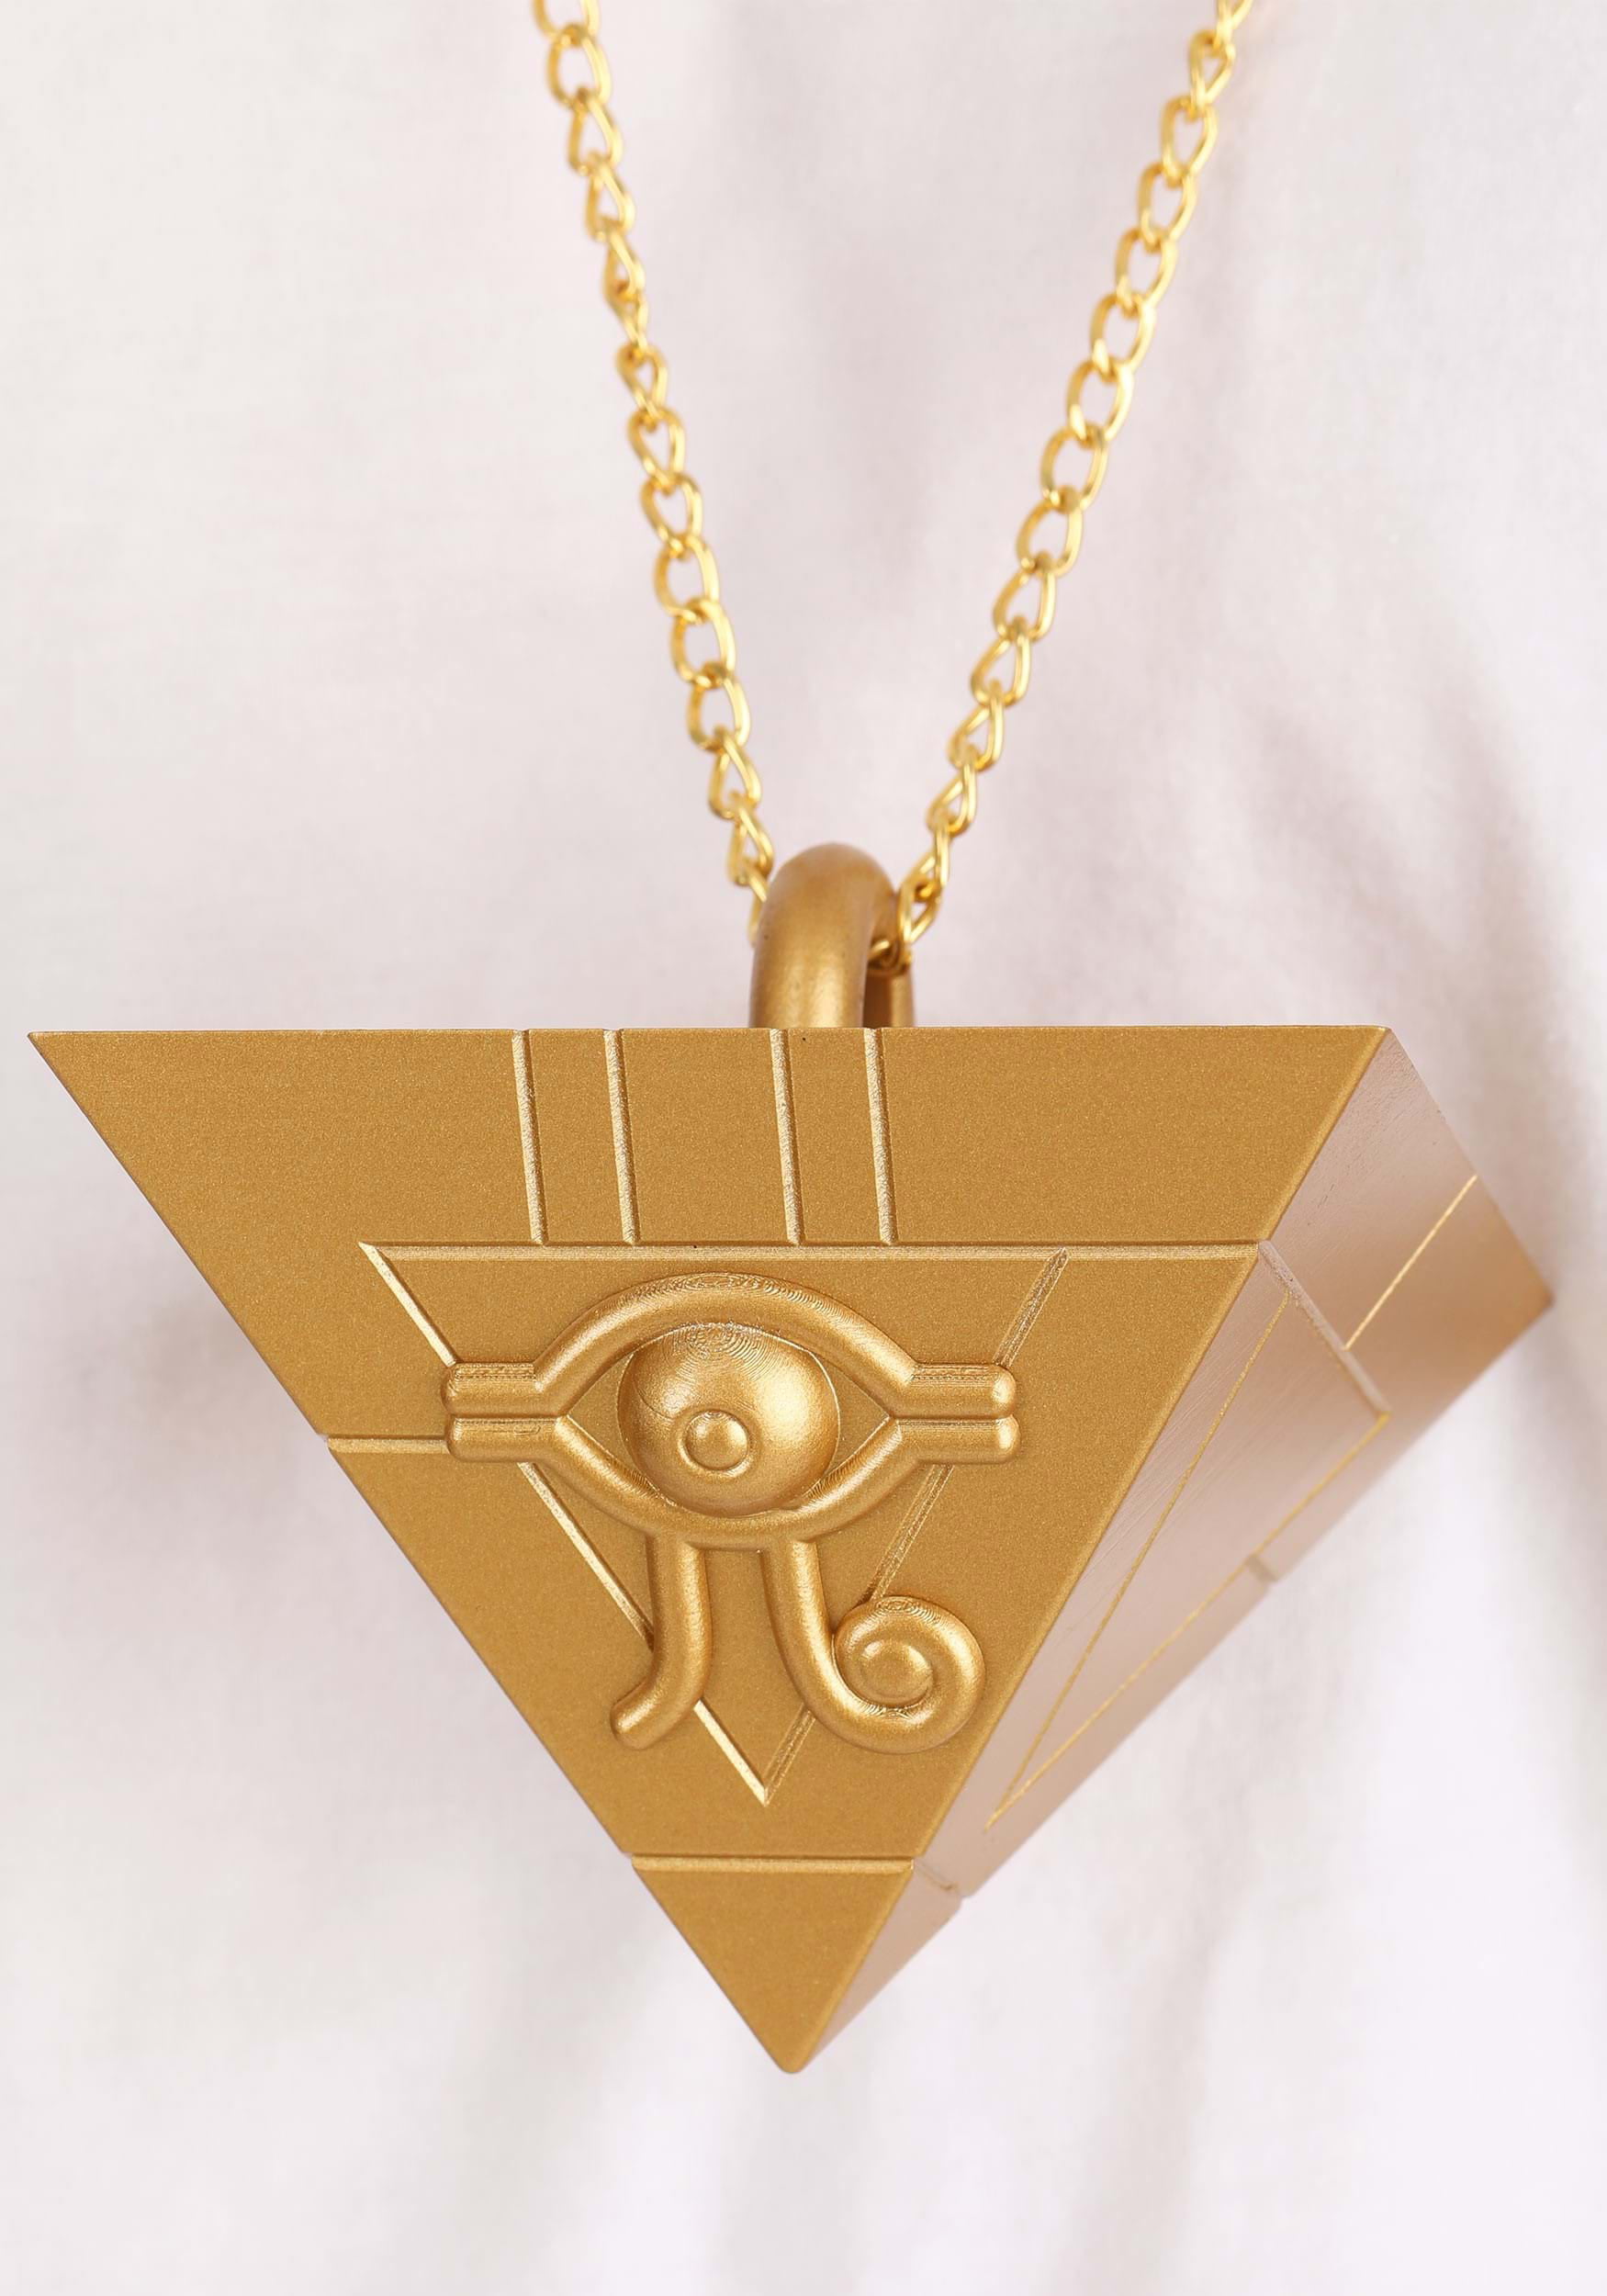 Game Yu Gi Oh Yugi Muto Millenium Puzzle Millennium Wheel Wisdom Necklace  With Wooden Gift Box Cosplay Unisex Otaku Gifts CX200721 From Dang10,  $23.09 | DHgate.Com